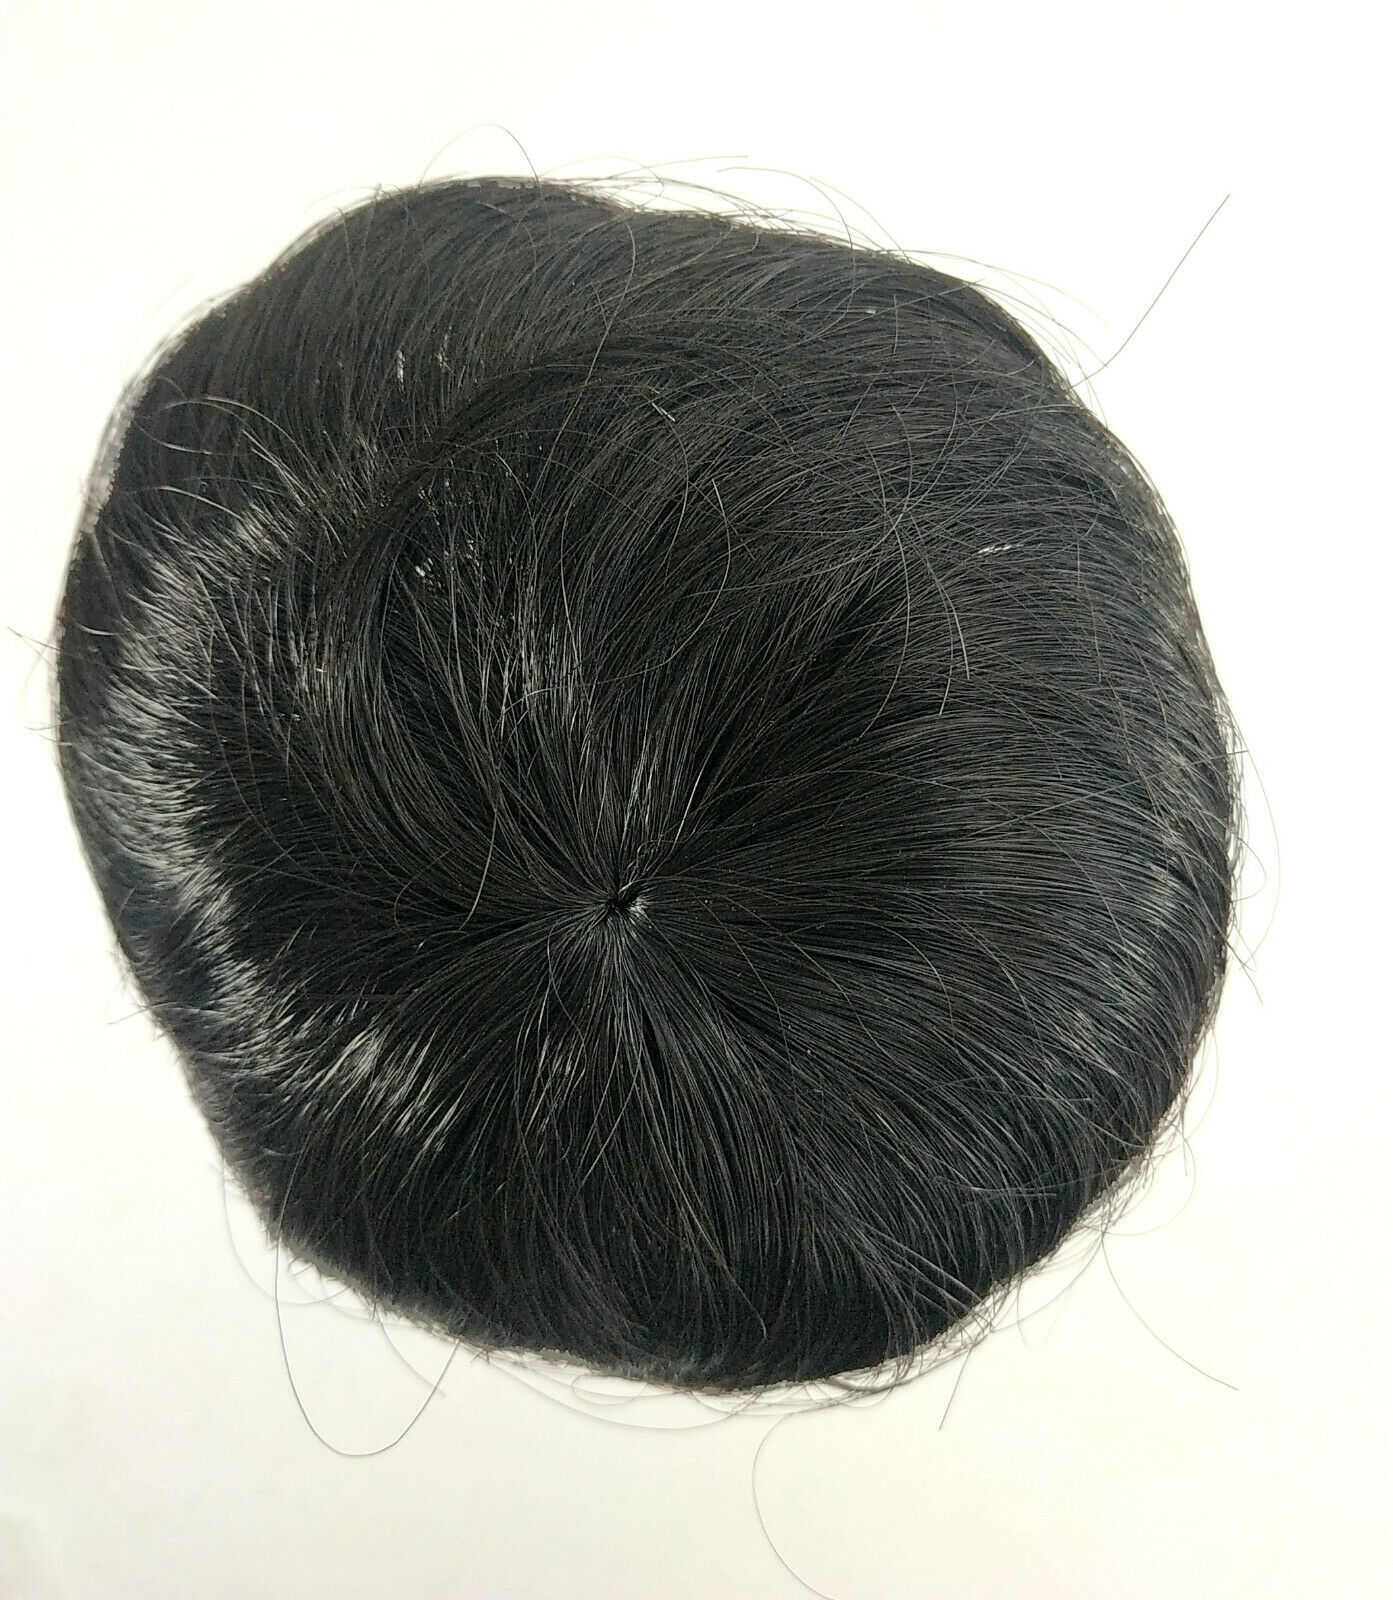 Vintage Playhouse Collection Round Cap Doll Wig 'William' Size 12-13 Black  - $14.80